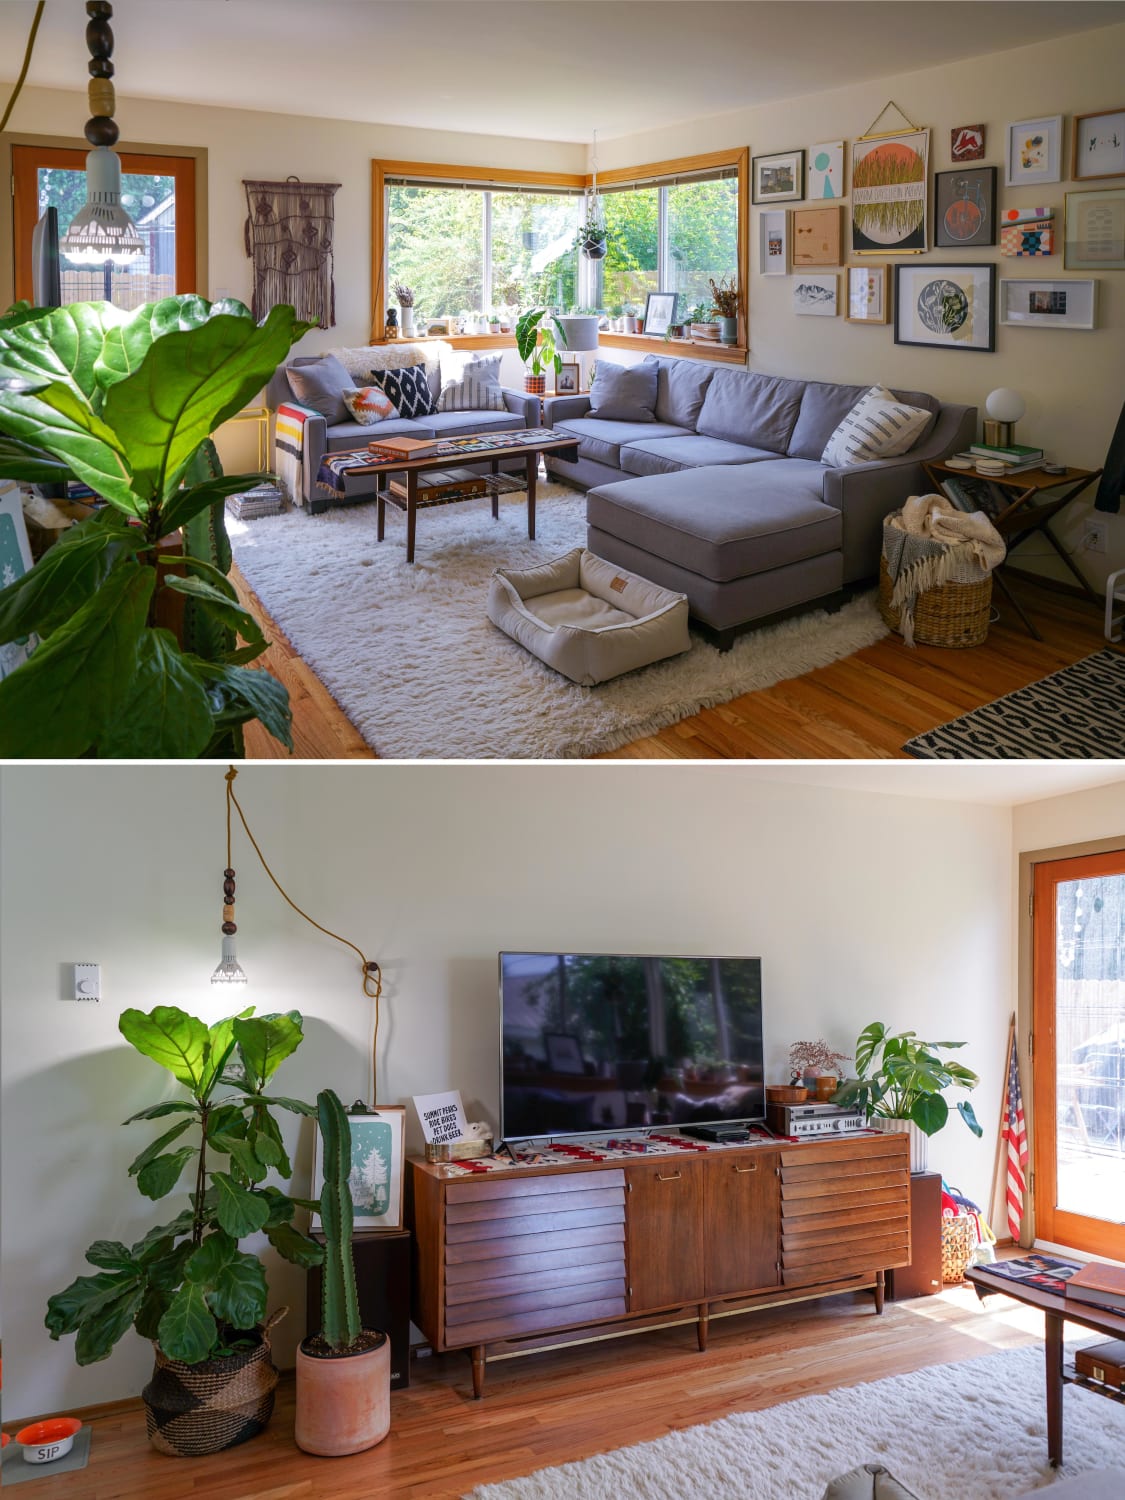 Sunny mid-century modern eclectic living room [Seattle, WA]